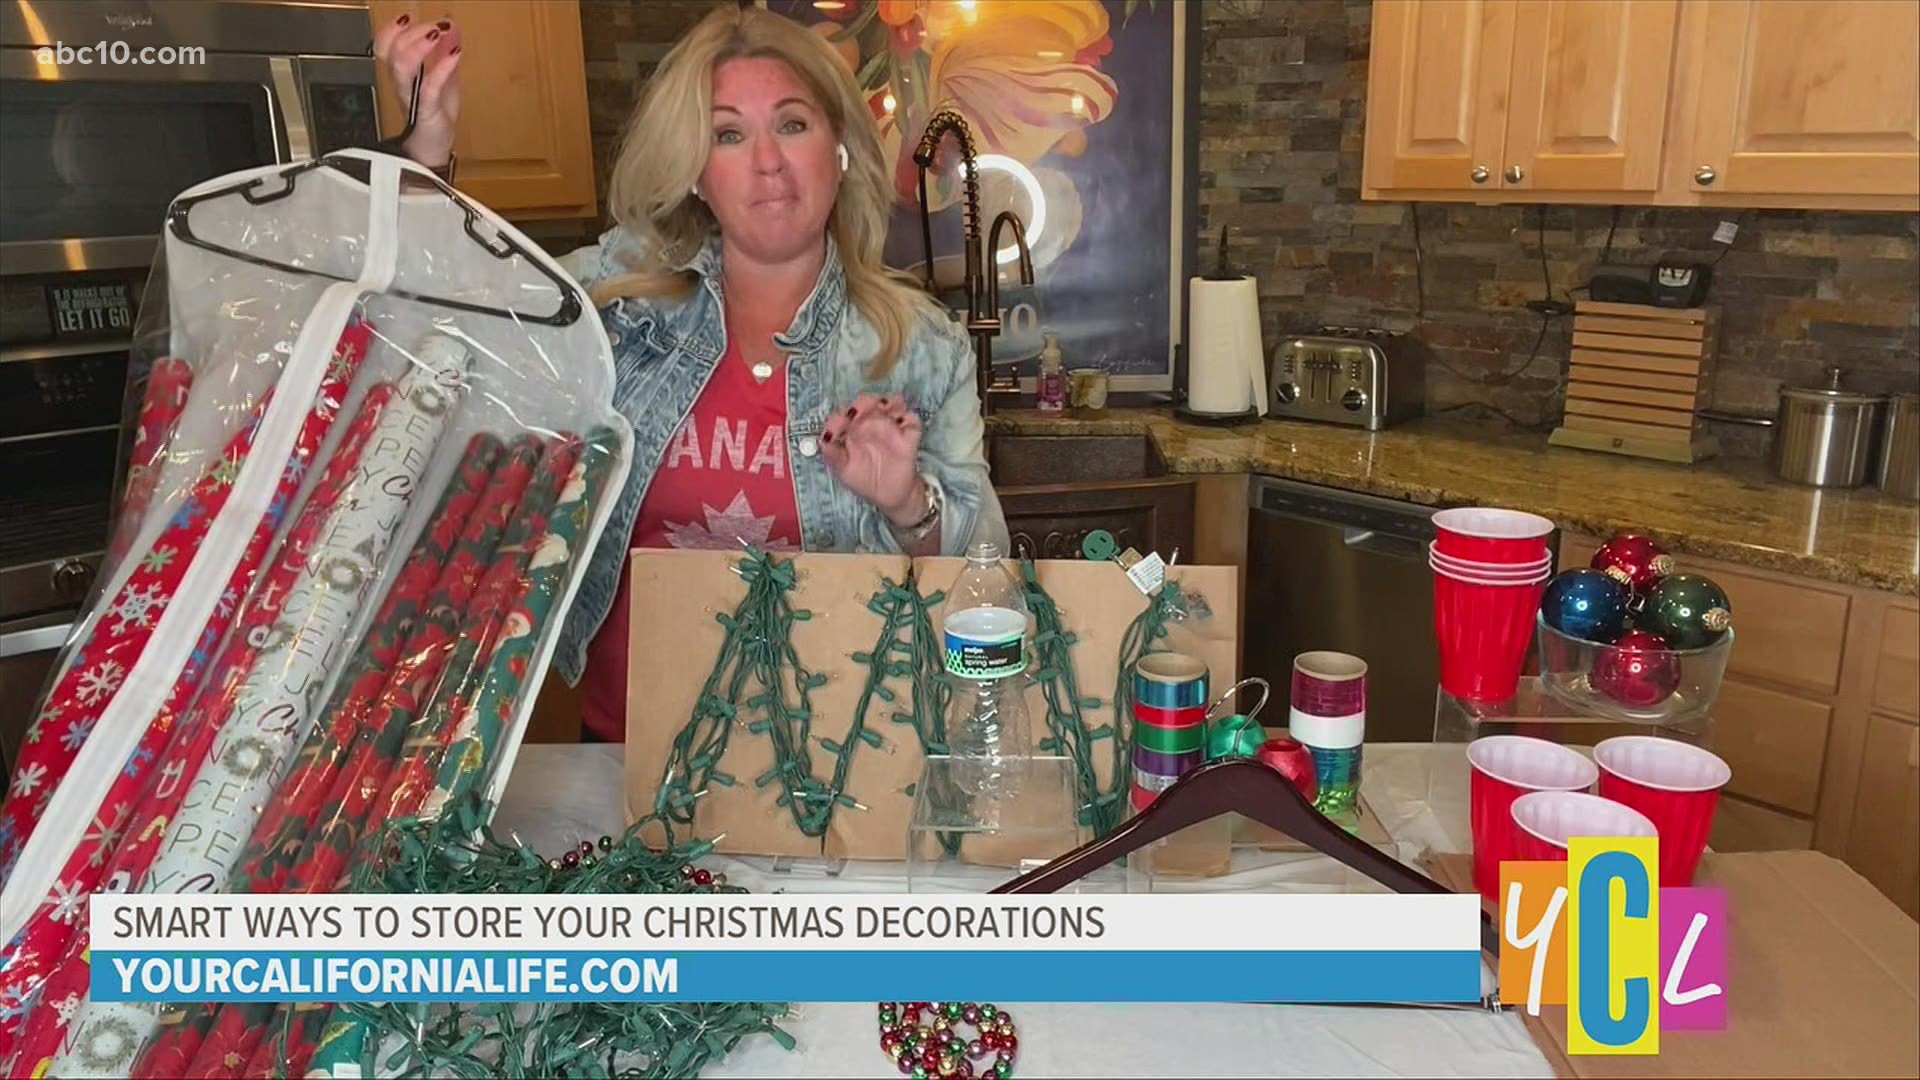 Find out smart ways to store your holiday decorations that don’t take up all of your closet space from Sherri French aka "Mom Hint!"